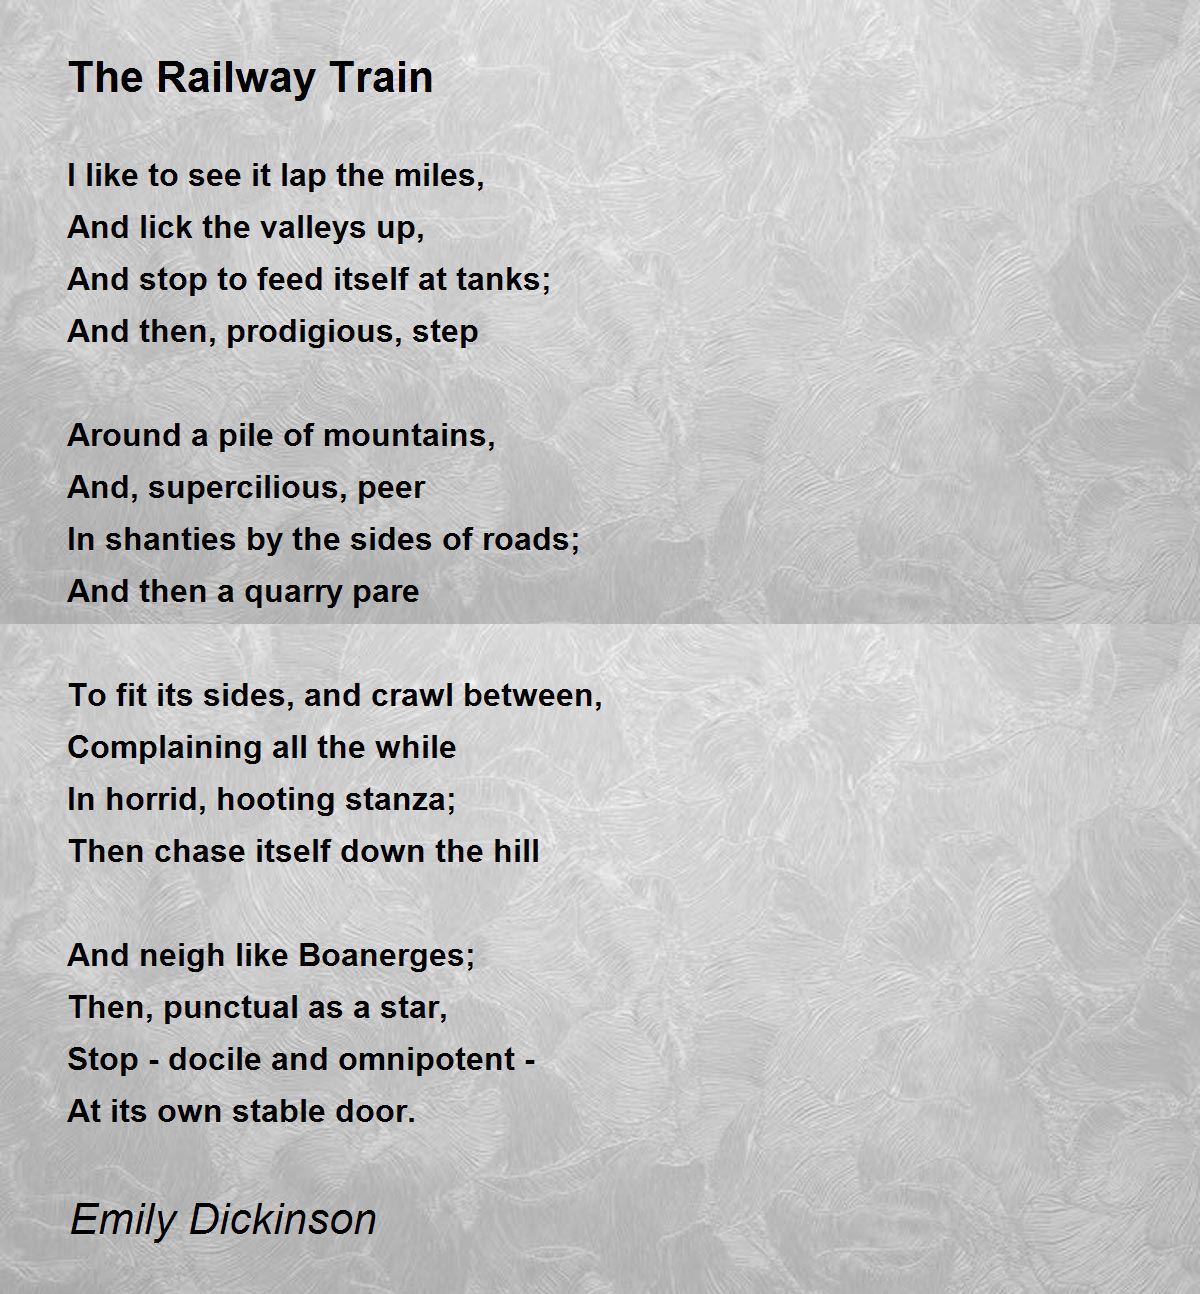 the railway train by emily dickinson answers